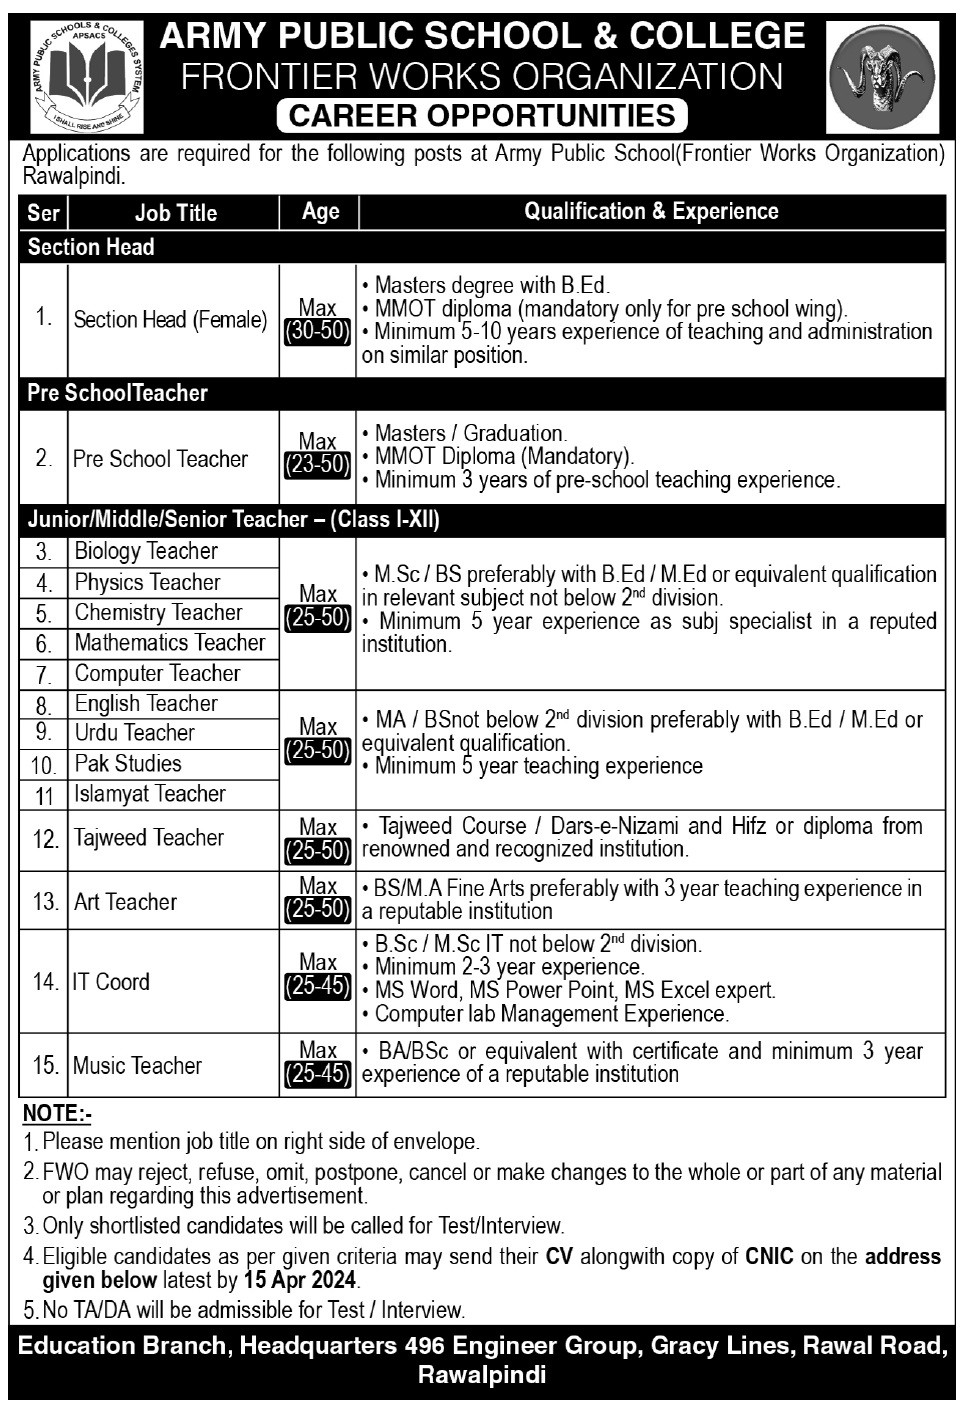 APSC Army Public School and College Jobs 2024 FWO Career Opportunities